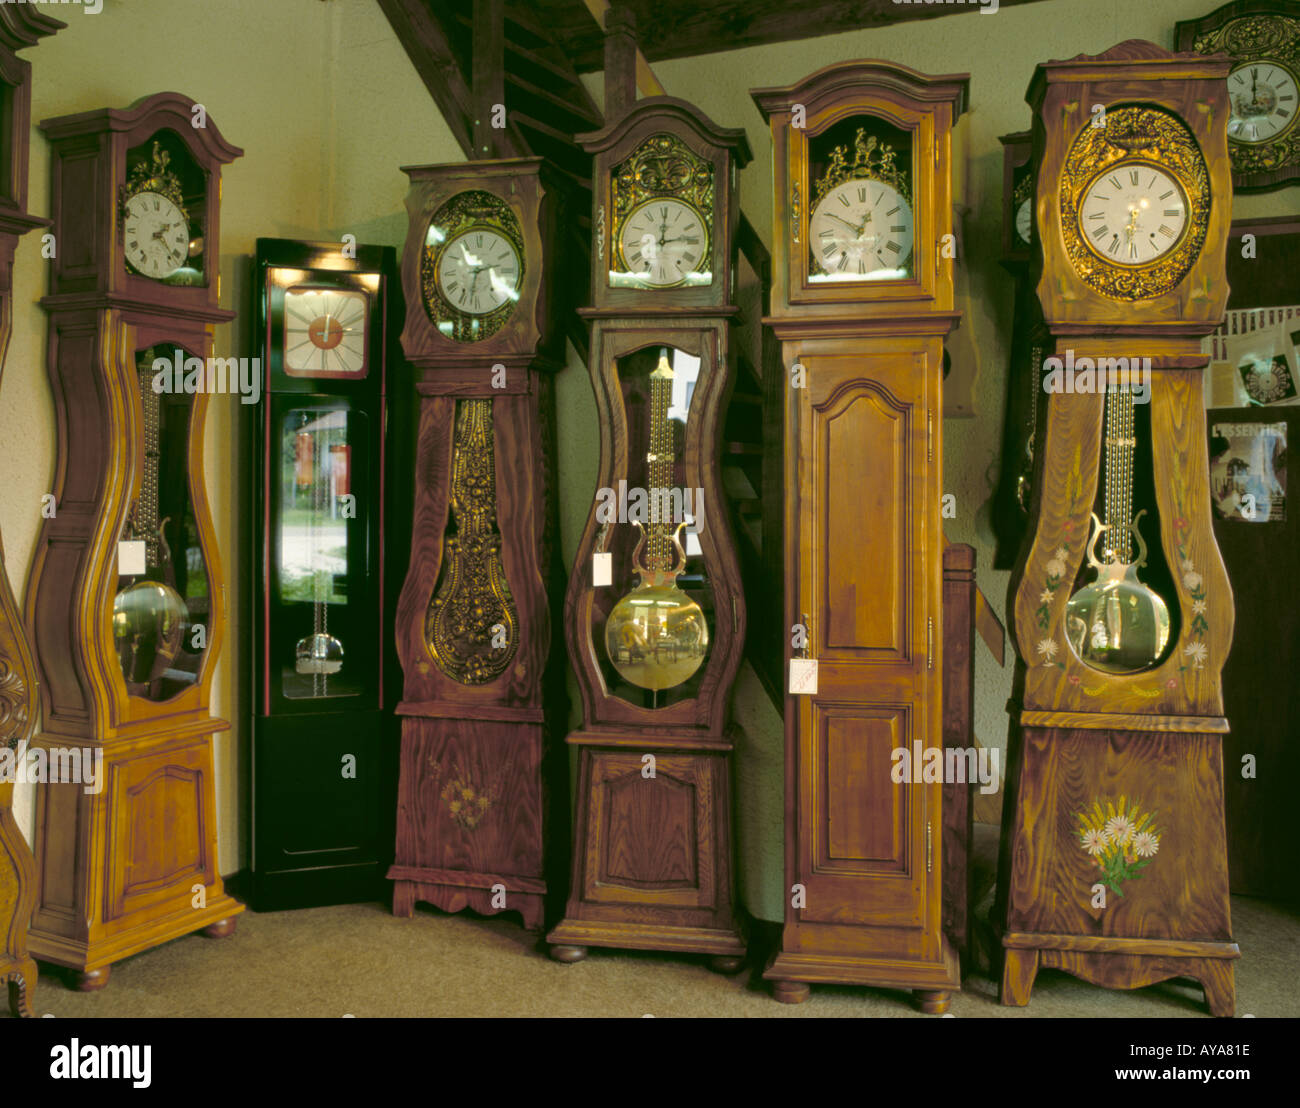 Traditional French Comtois grandfather clocks, The Jura, France Stock Photo  - Alamy